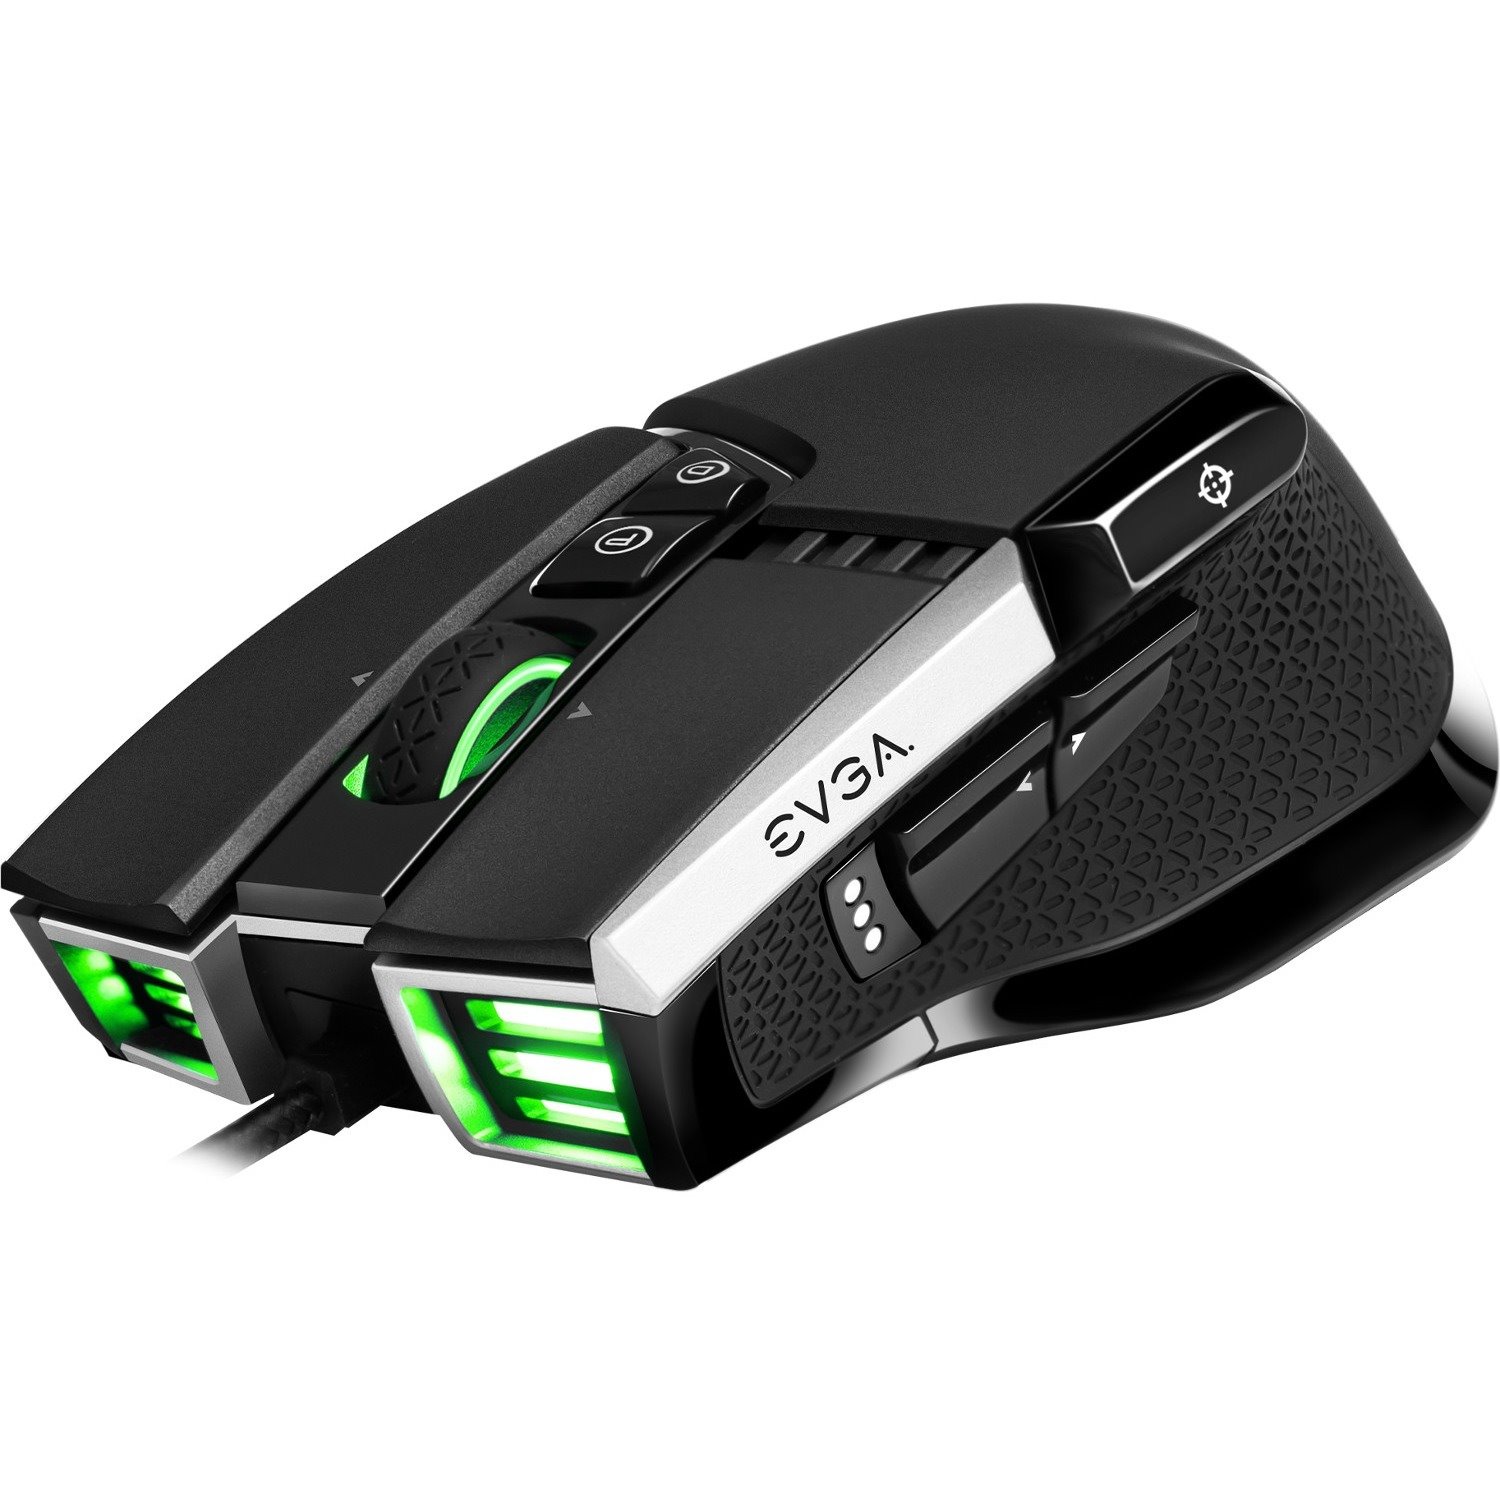 EVGA X17 Gaming Mouse - USB 2.0 Type A - Optical - 10 Button(s) - Black